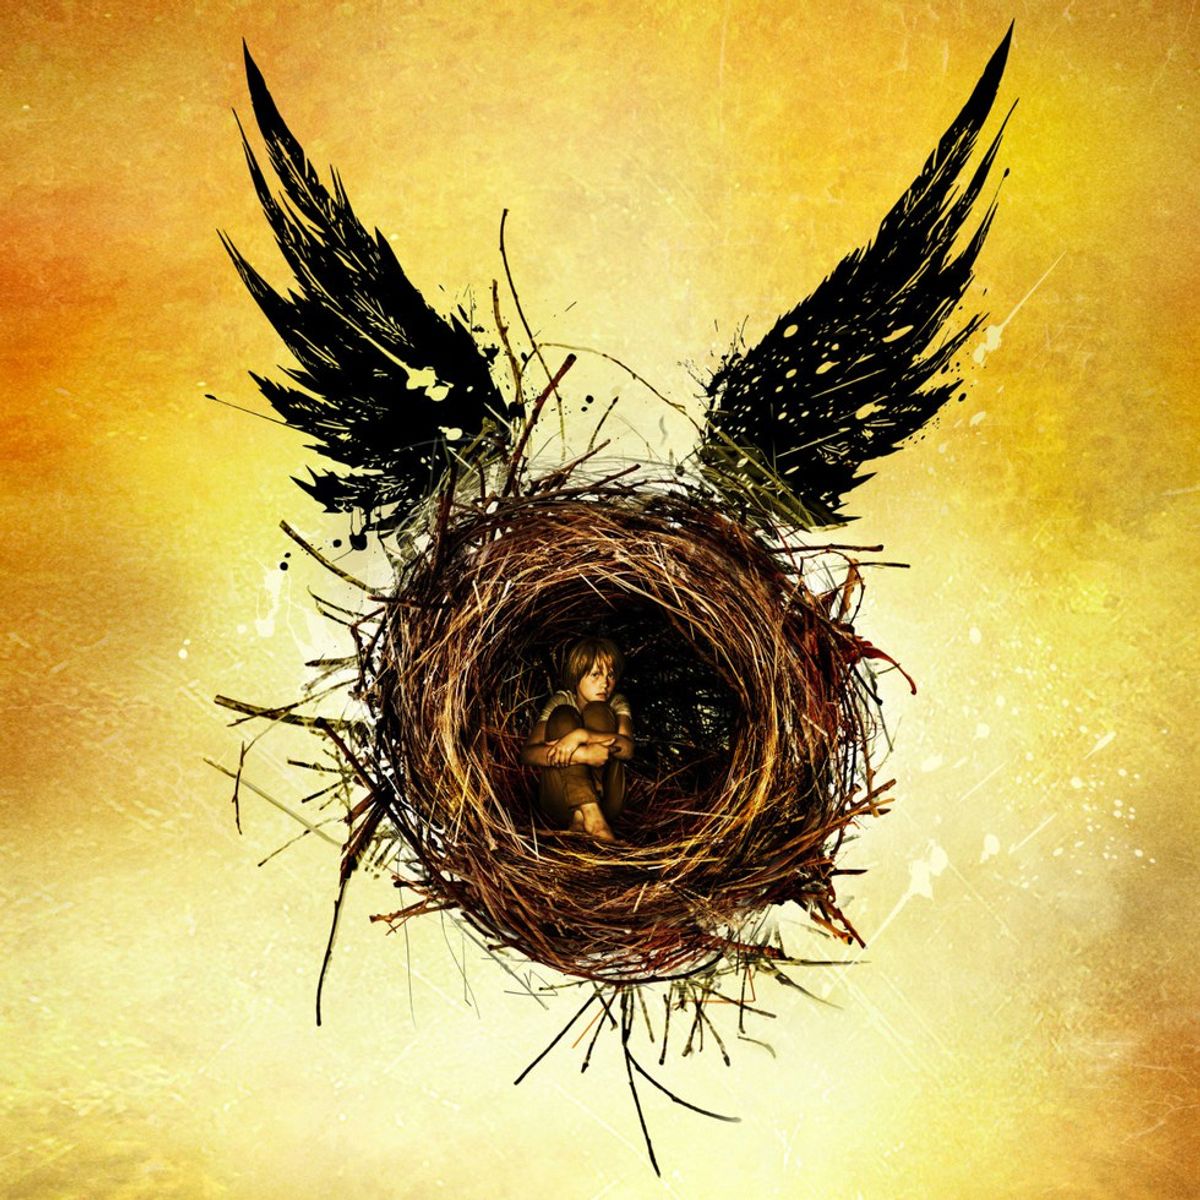 A Review Of The 'Harry Potter And The Cursed Child' Script